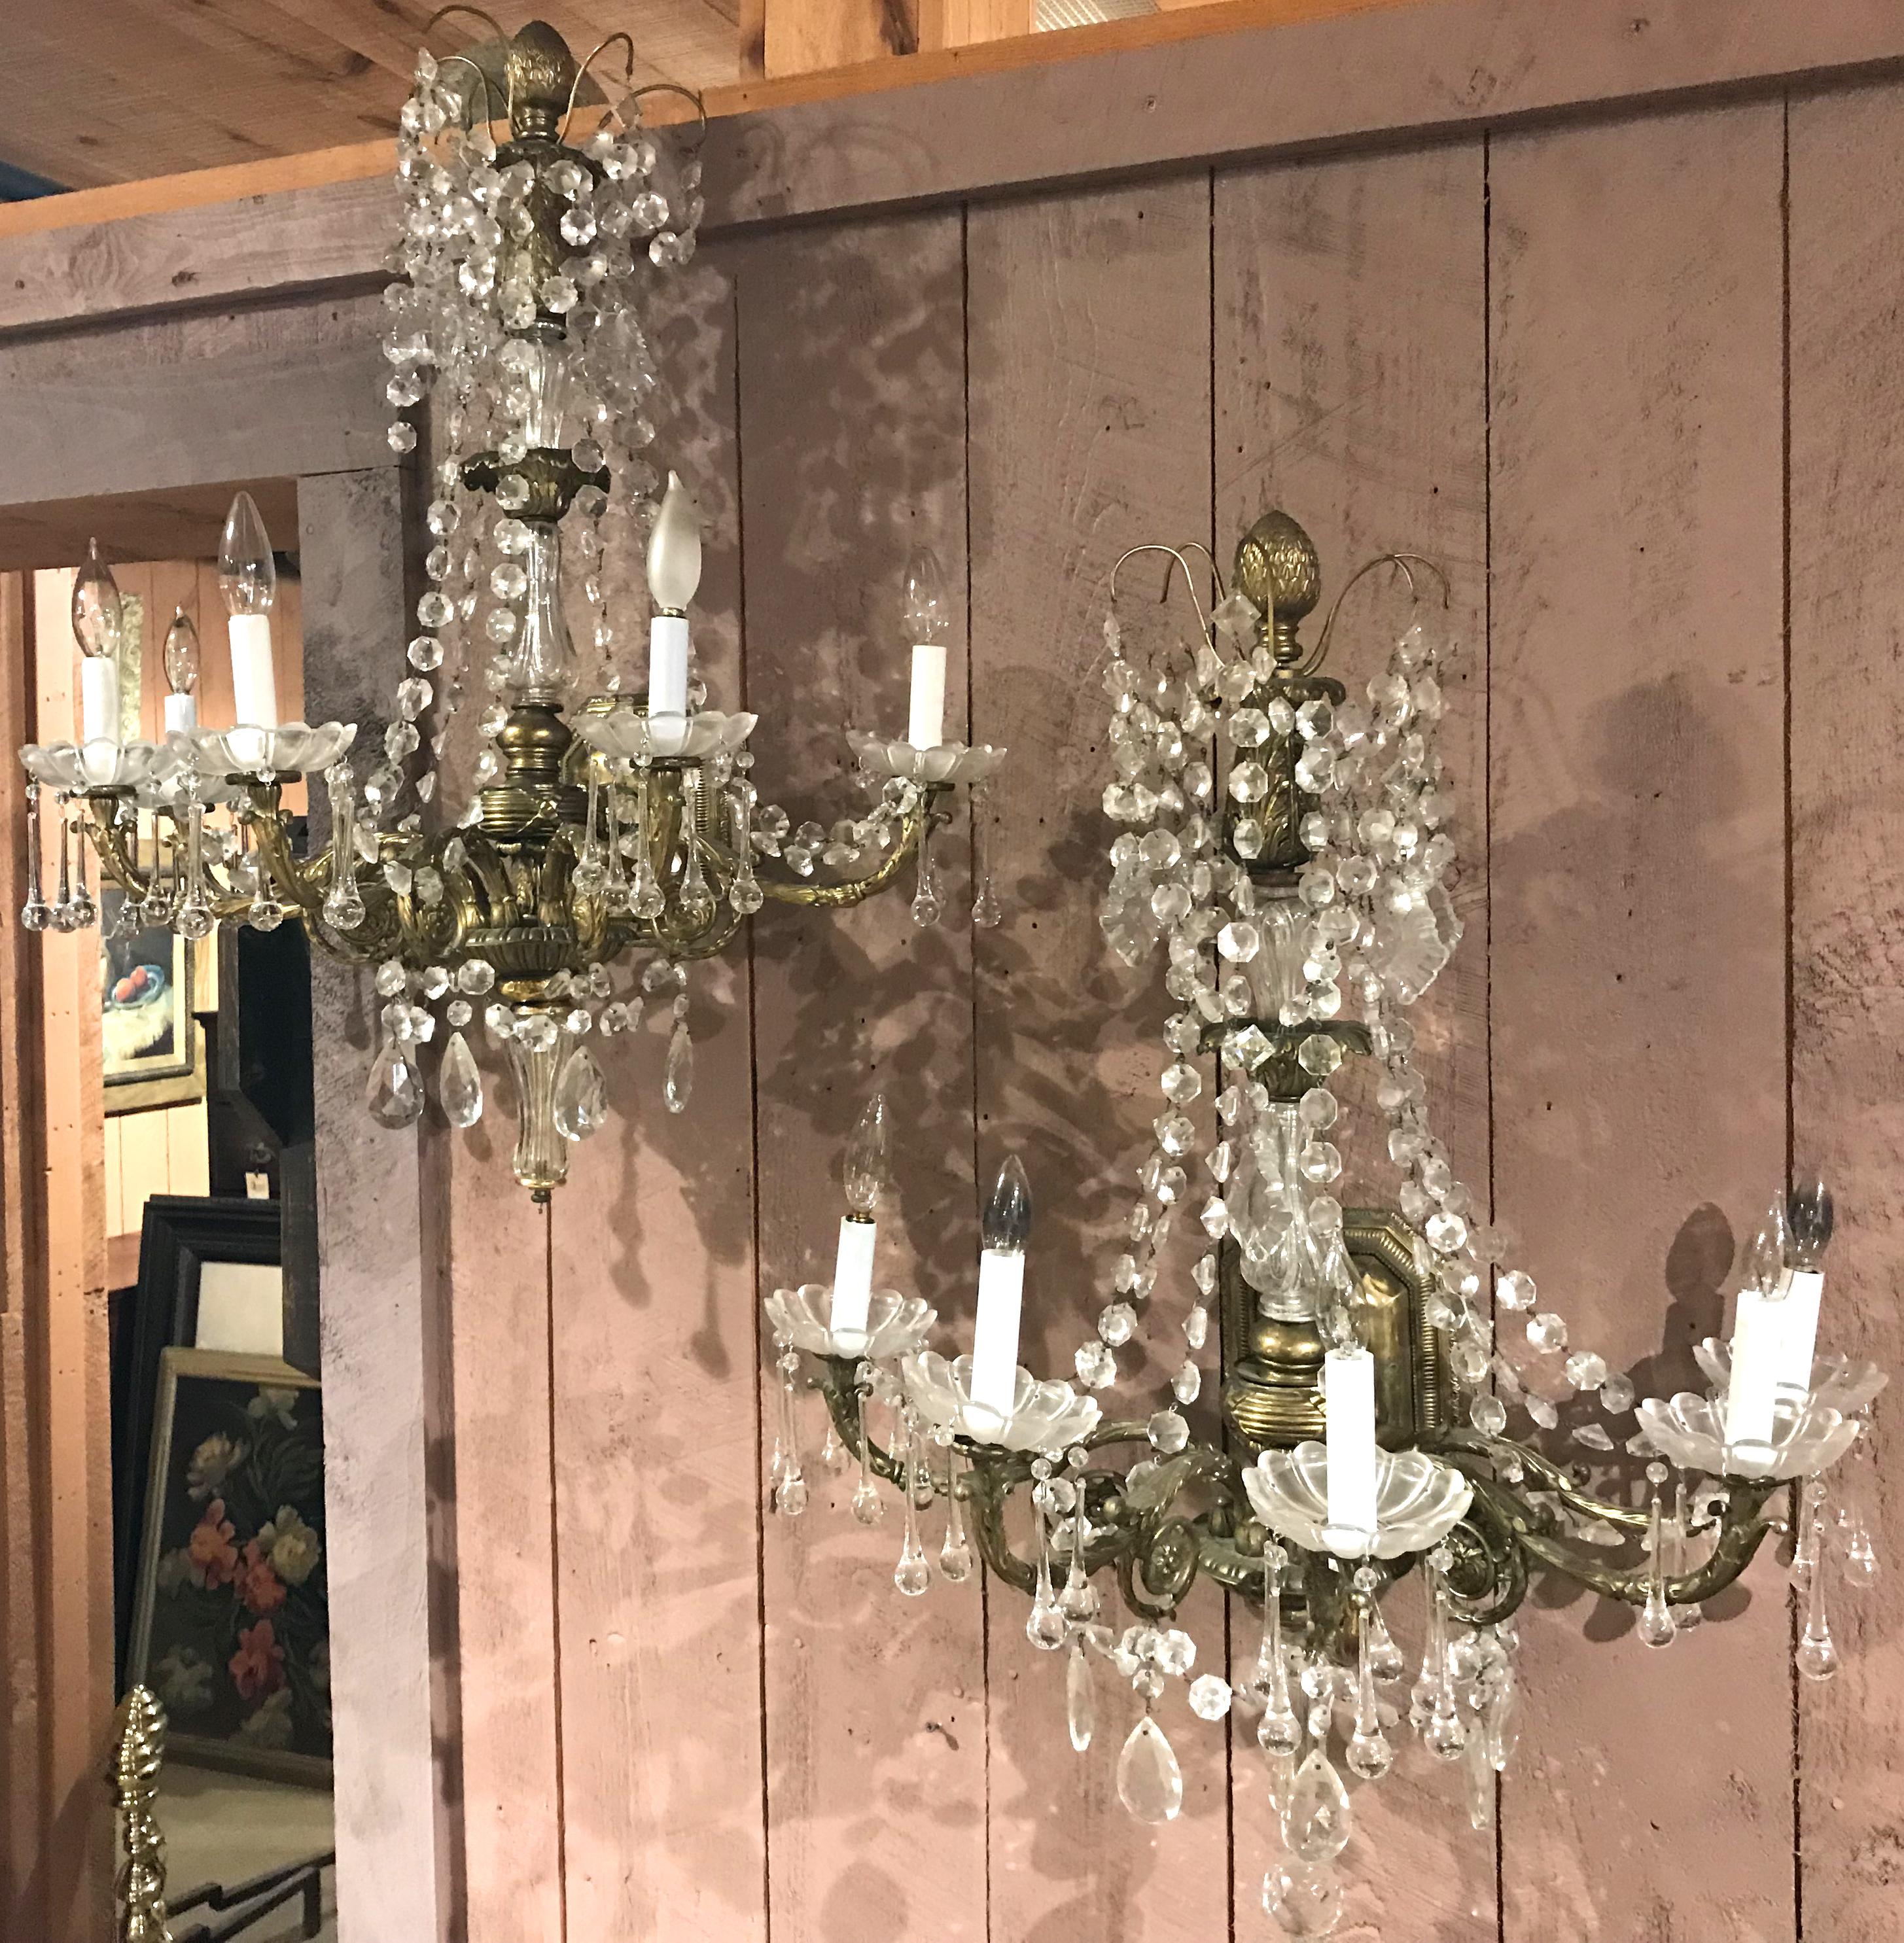 A spectacular pair of vintage gilt bronze five-light sconces with Baccarat style diamond cut crystals, possibly from the Cristallerie de Paris, circa 1930s. Additional elongated teardrop prisms have been added to this attractive pair. Very good